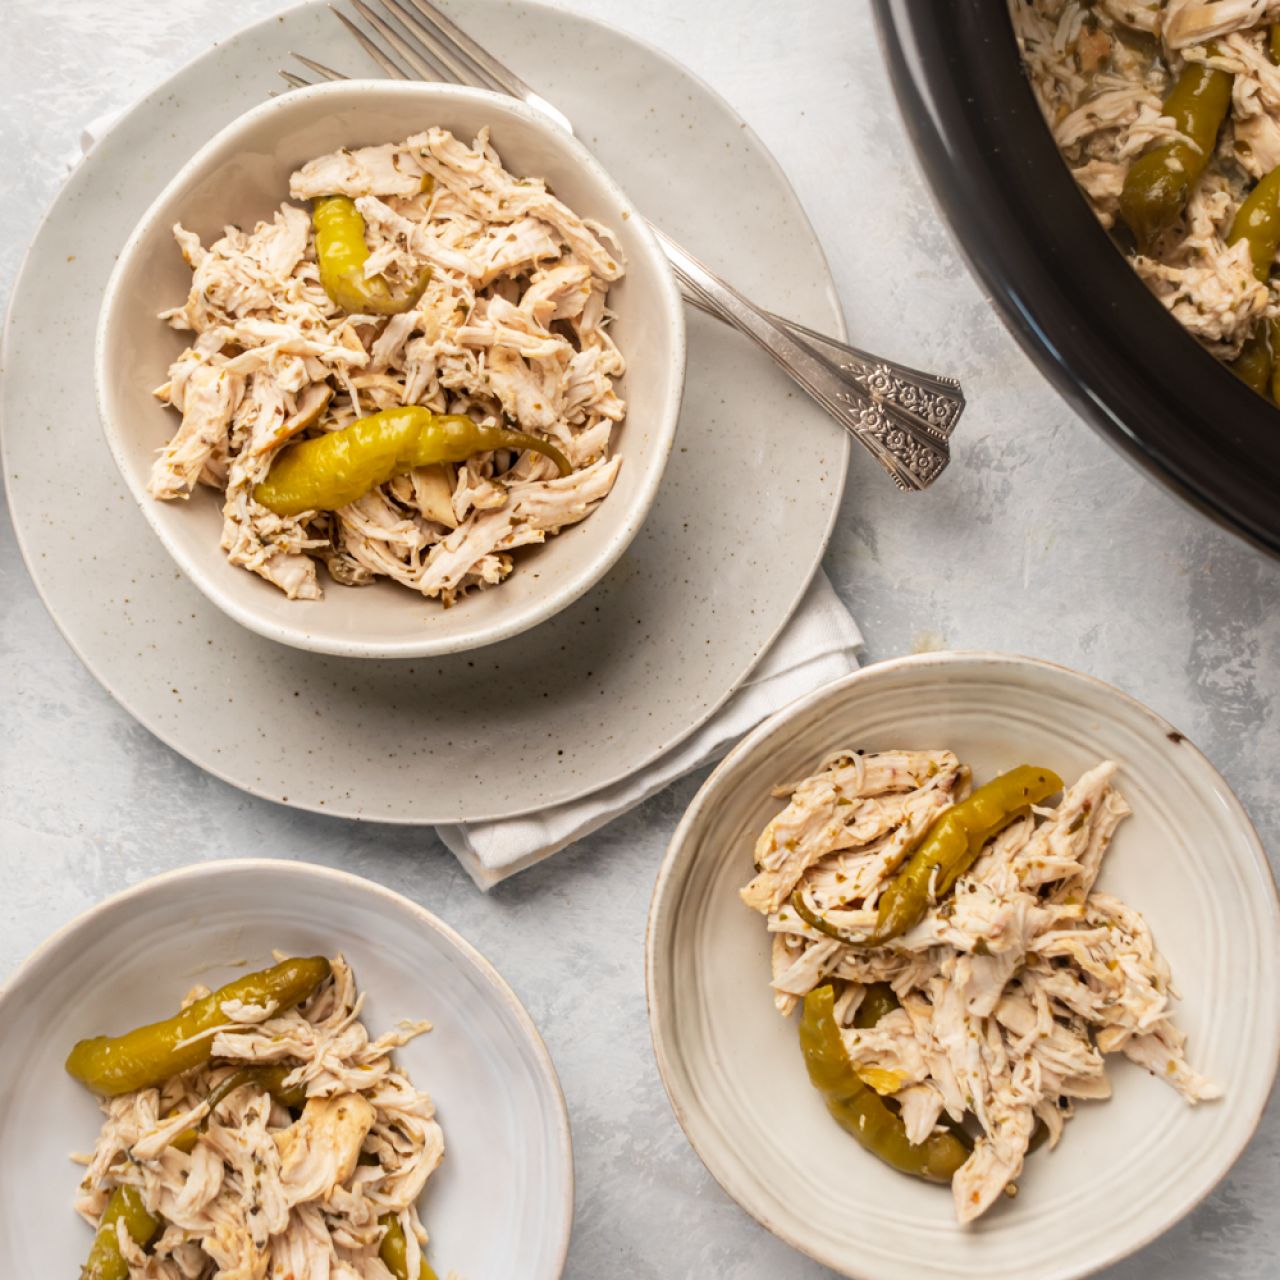 https://www.slenderkitchen.com/sites/default/files/styles/gsd-1x1/public/recipe_images/slow-cooker-pepperoncini-chicken_0.jpg